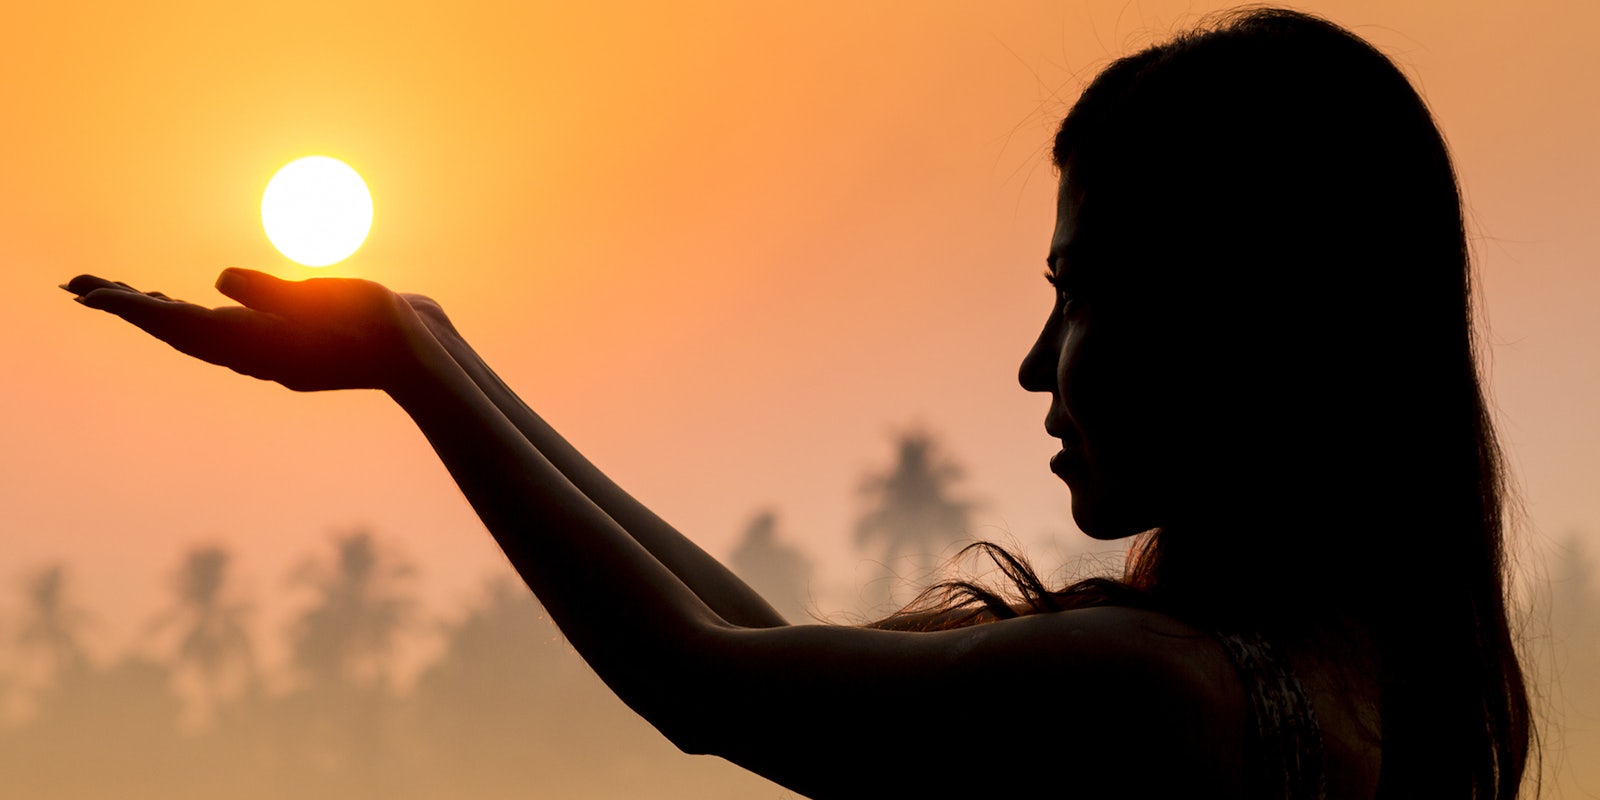 Portrait of young woman as silhouette and hand holding the sun